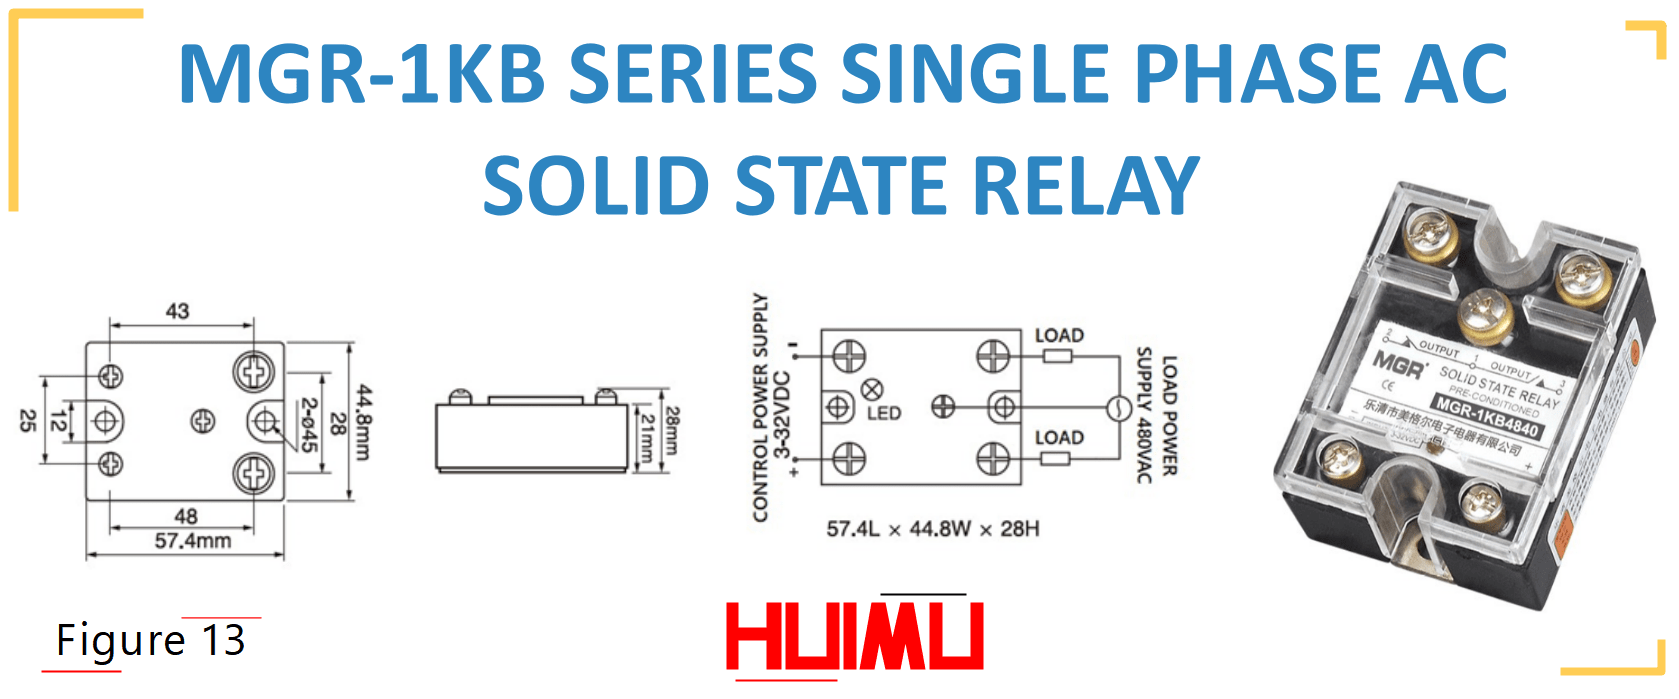 MGR-1KB SERIES SINGLE PHASE AC SOLID STATE RELAY